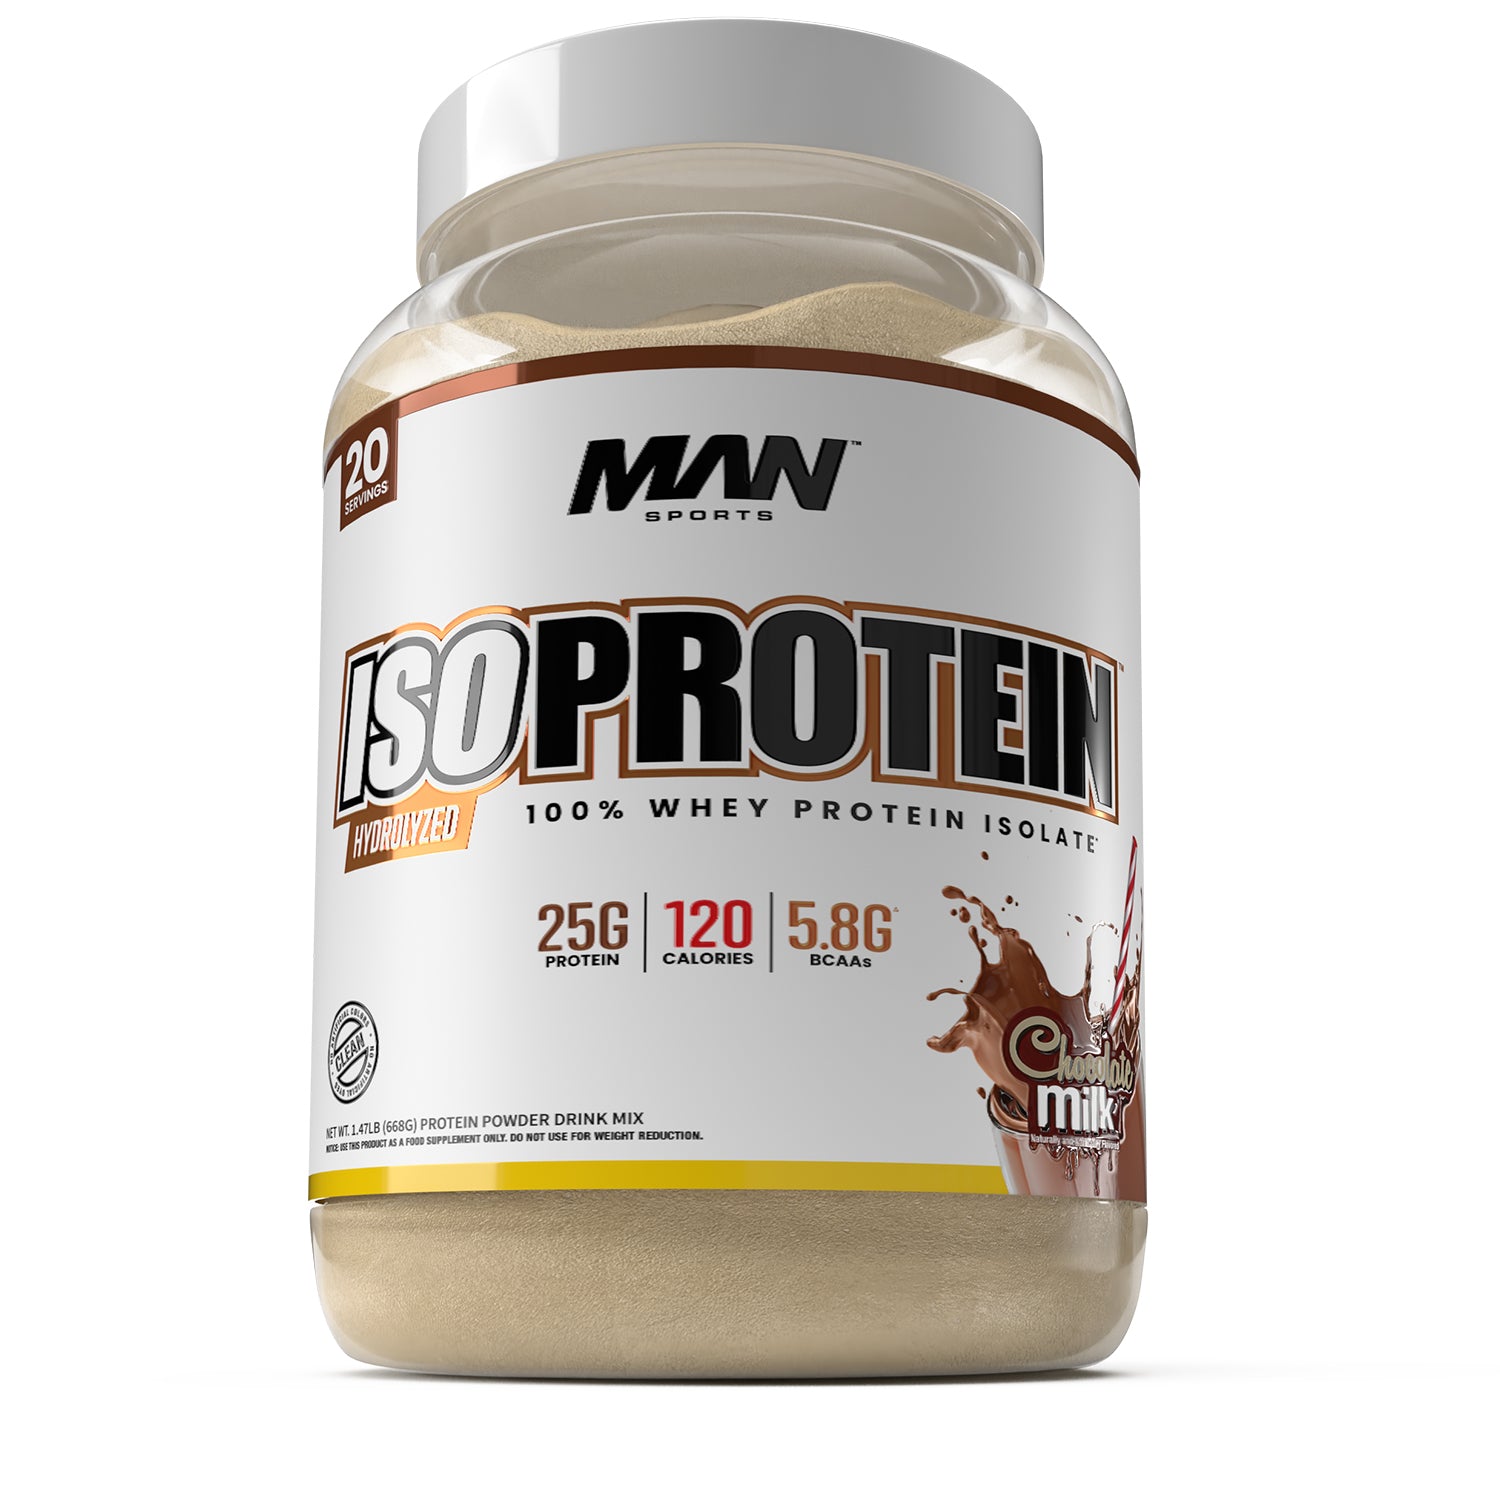 Cutler Nutrition Total ISO Whey Isolate Protein Powder: Best Tasting Whey  Protein Shake, 100% Whey Protein Isolate, Perfect Post Workout Protein